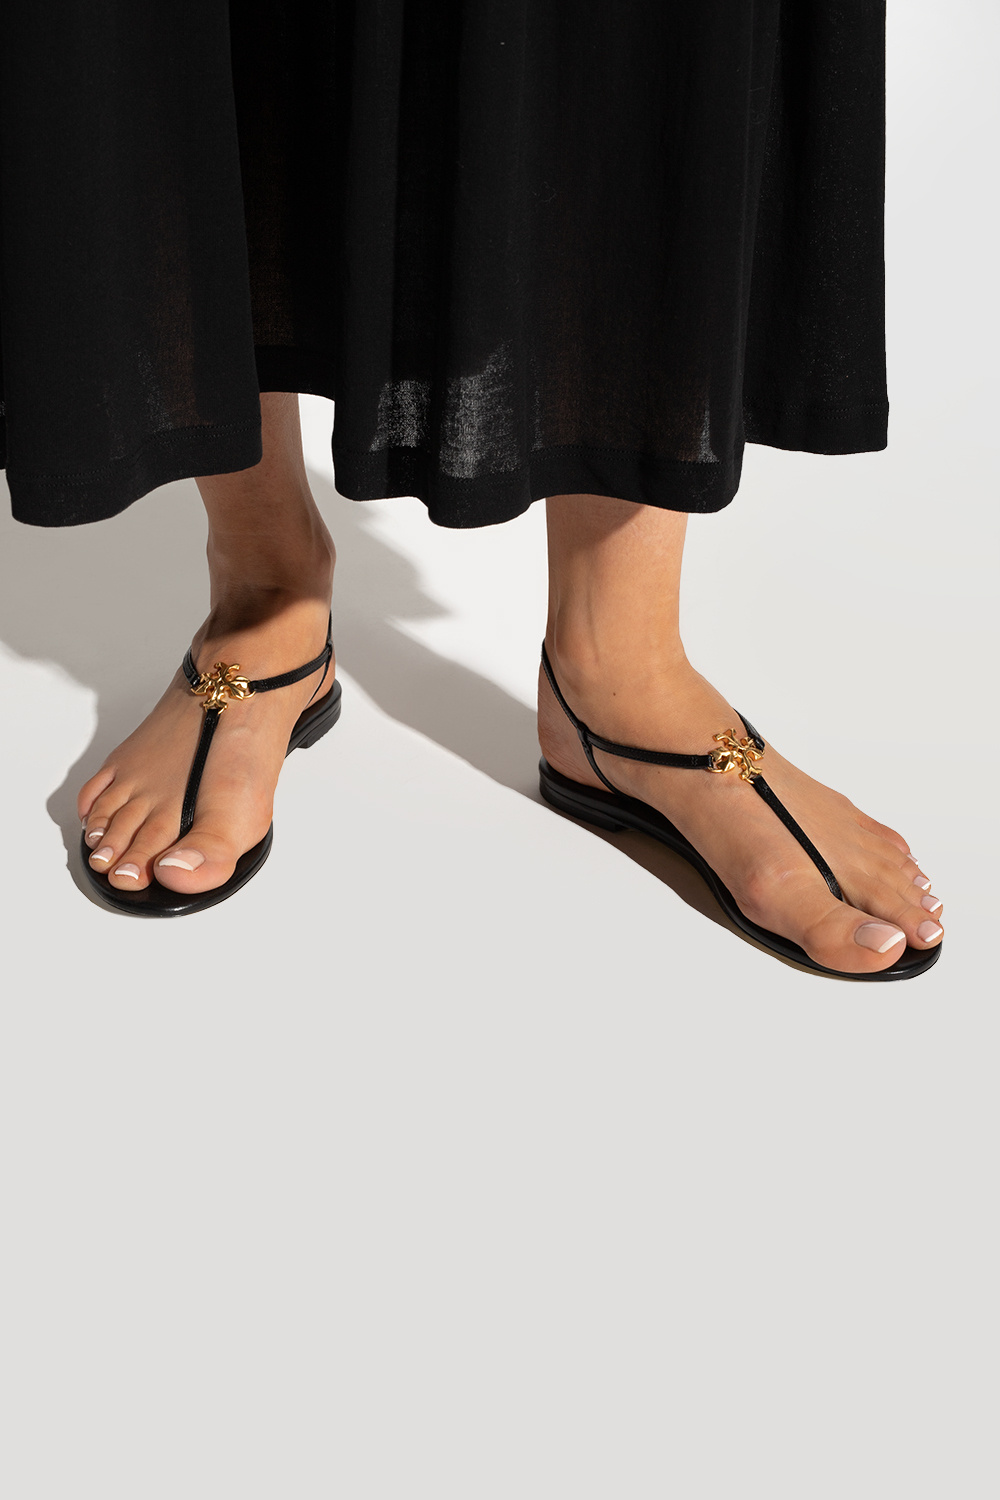 Tory Burch Sandals With Ankle Strap 